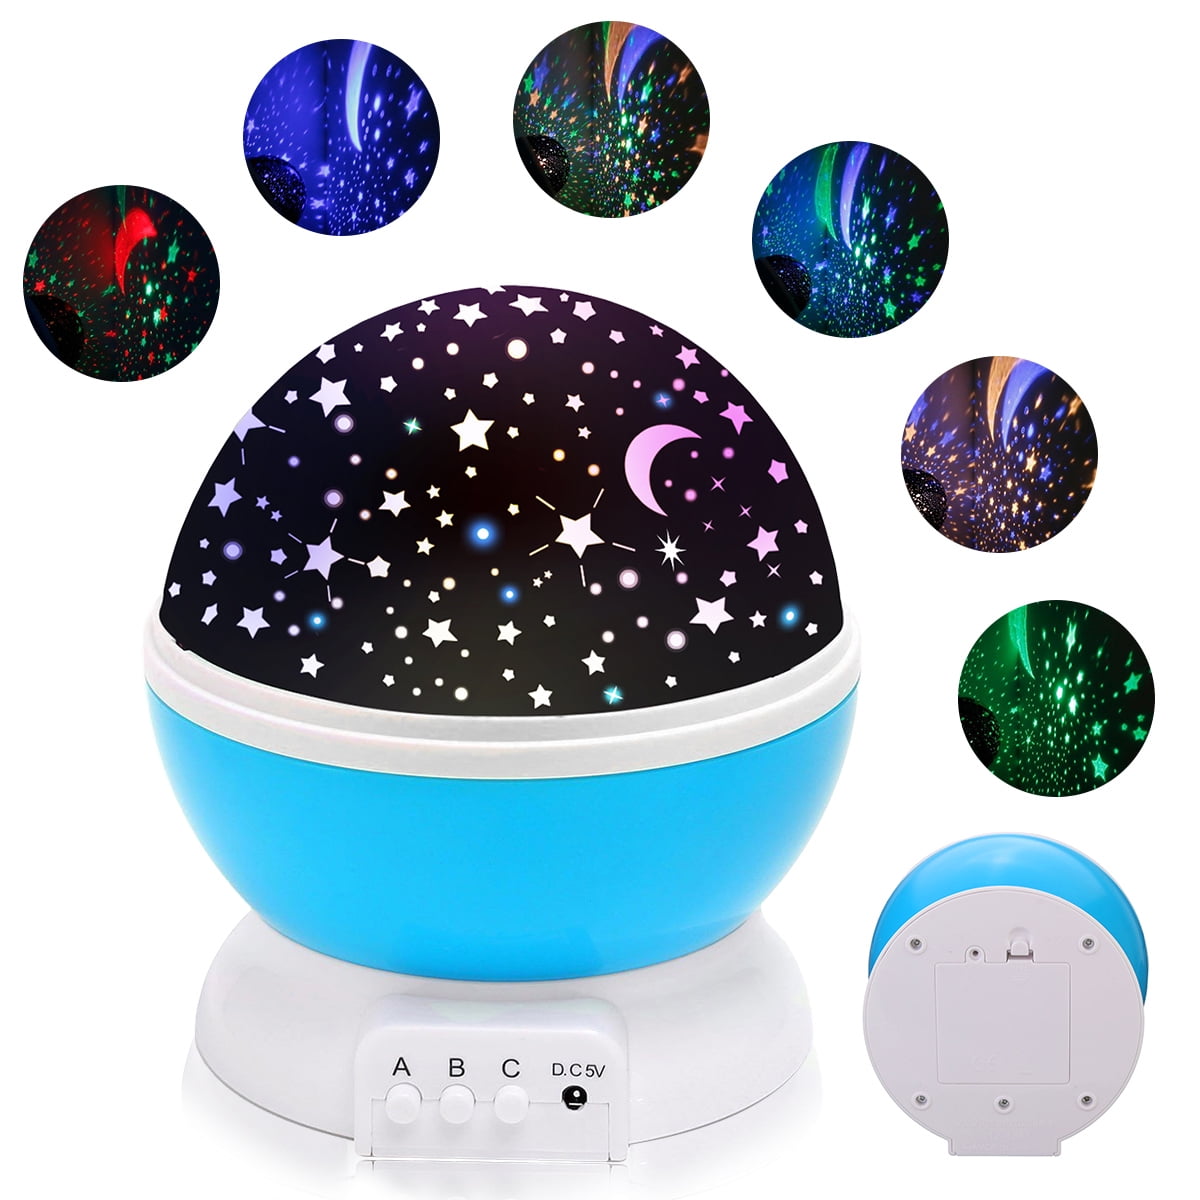 Star Night Light Projector LED Rotating Universe Starry Desk Lamp for Kids Gifts 